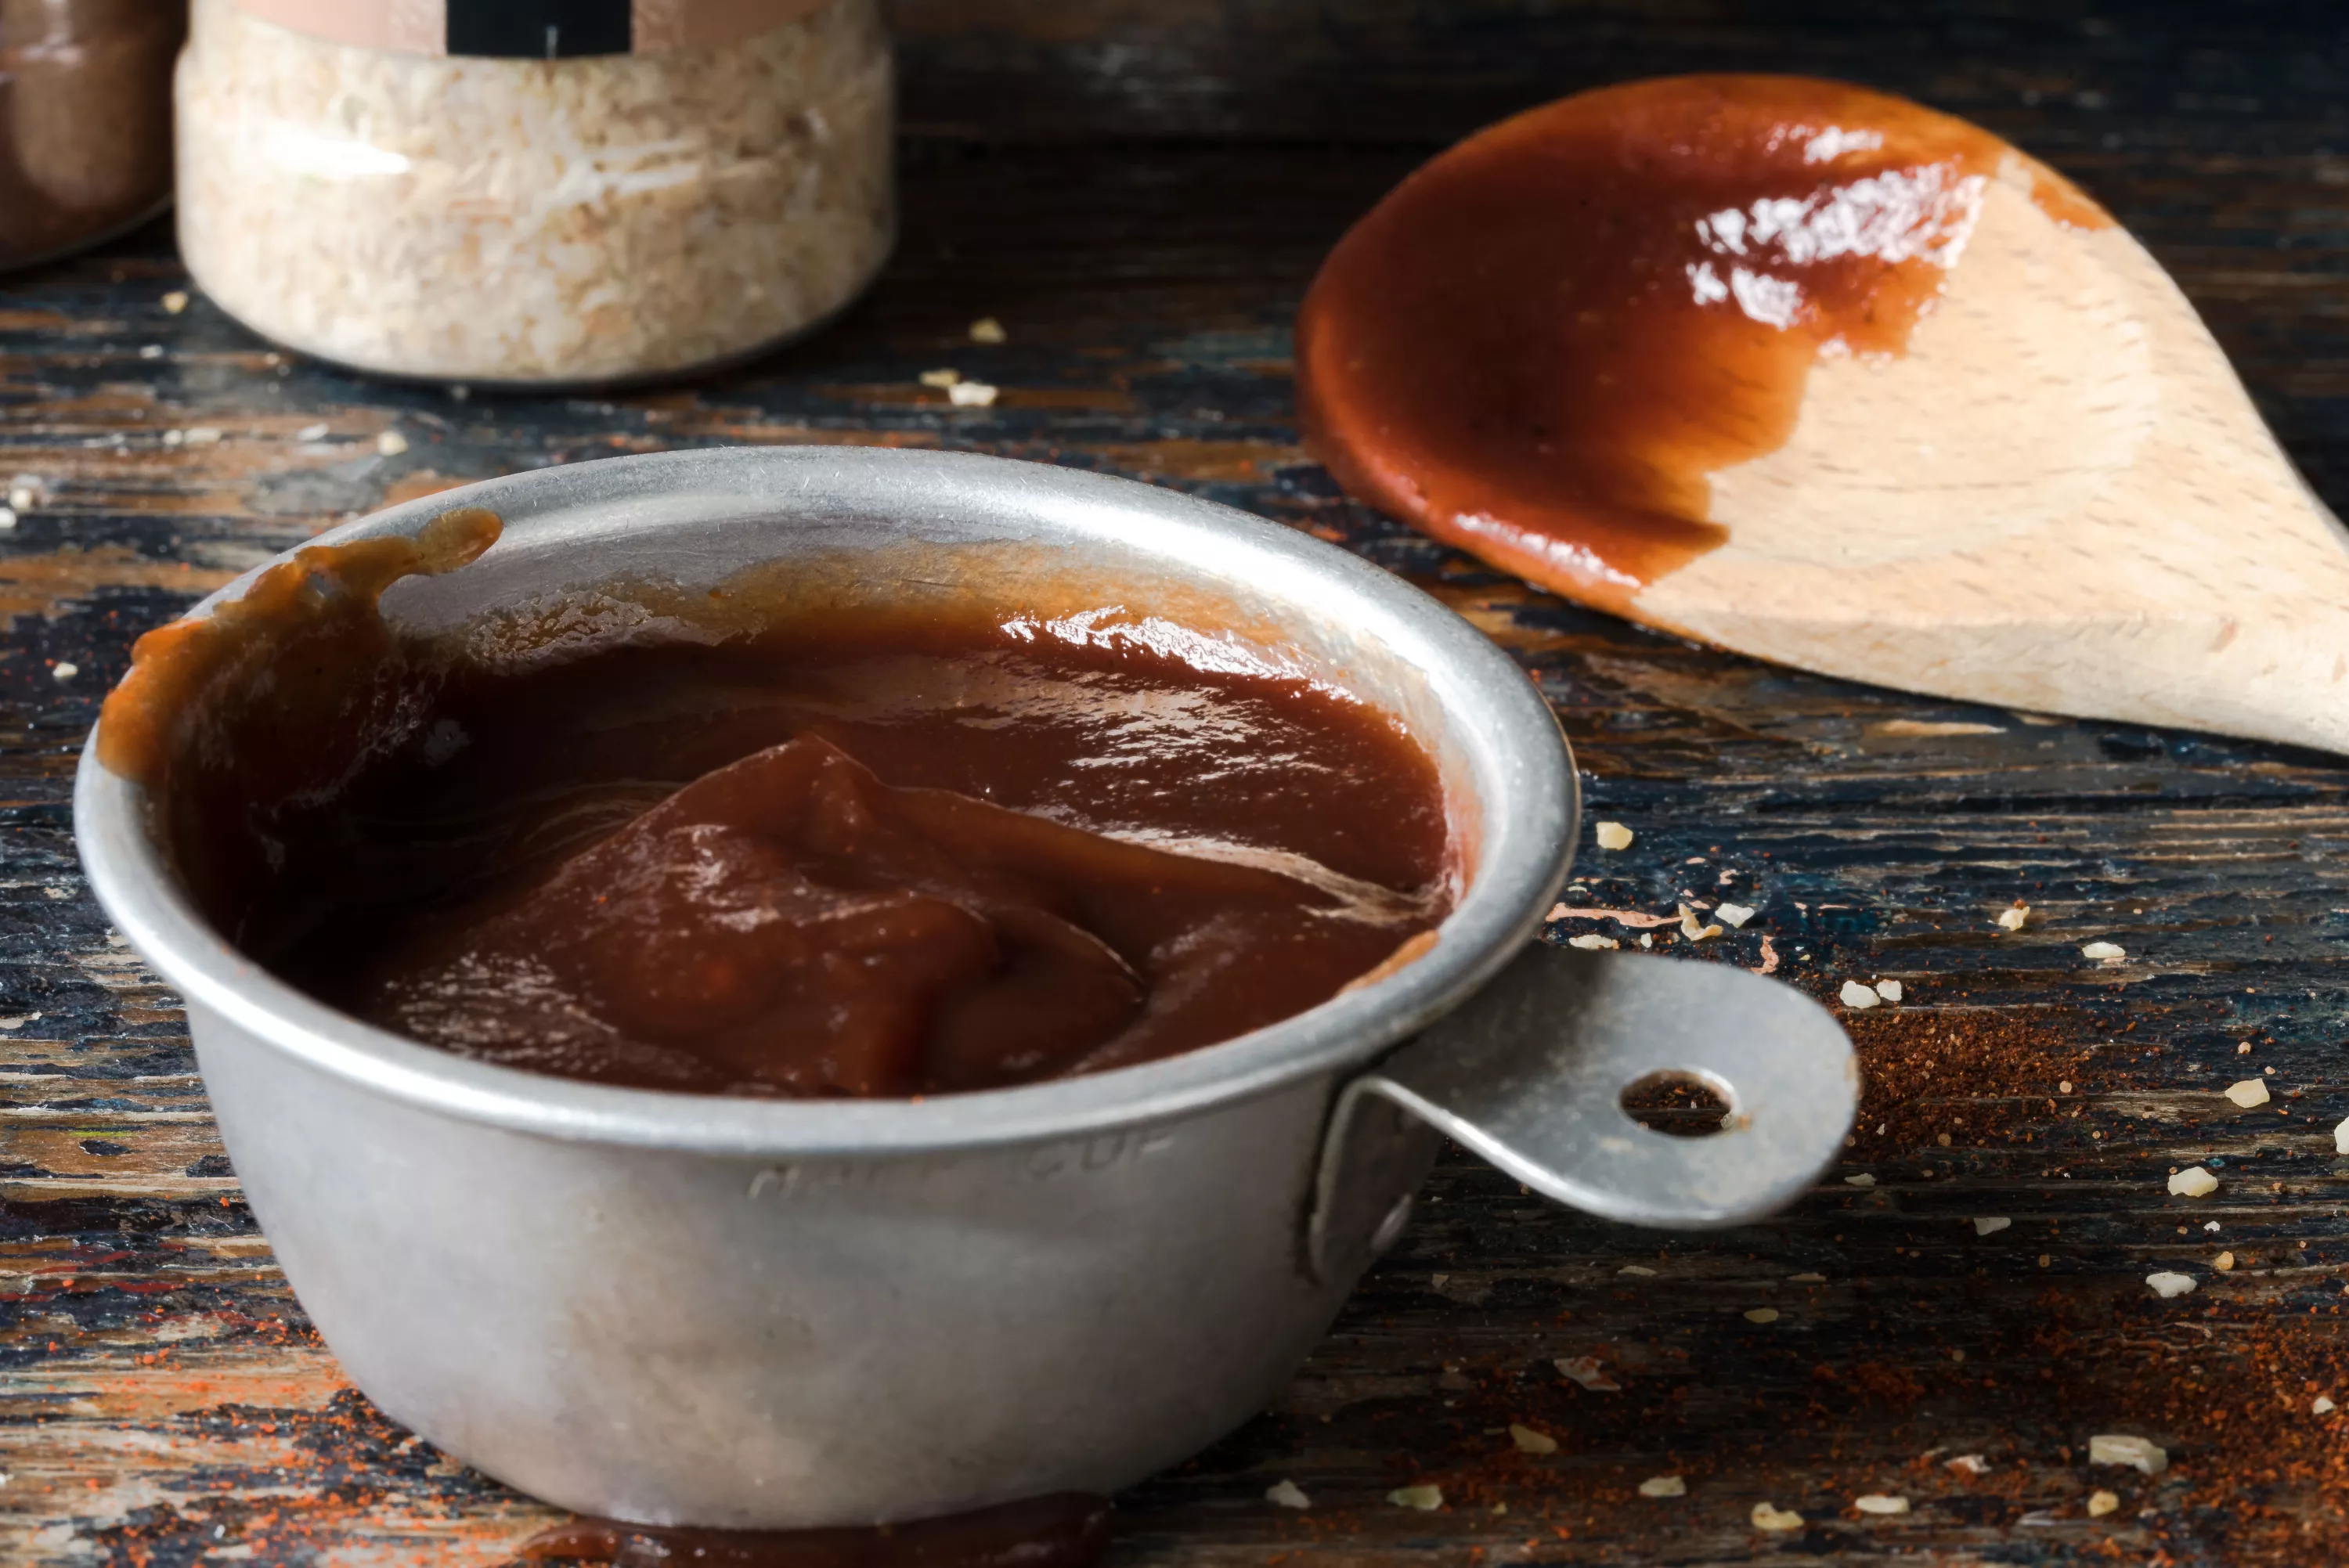 A ramekin of barbeque sauce next to a wooden spatula used to stir it.